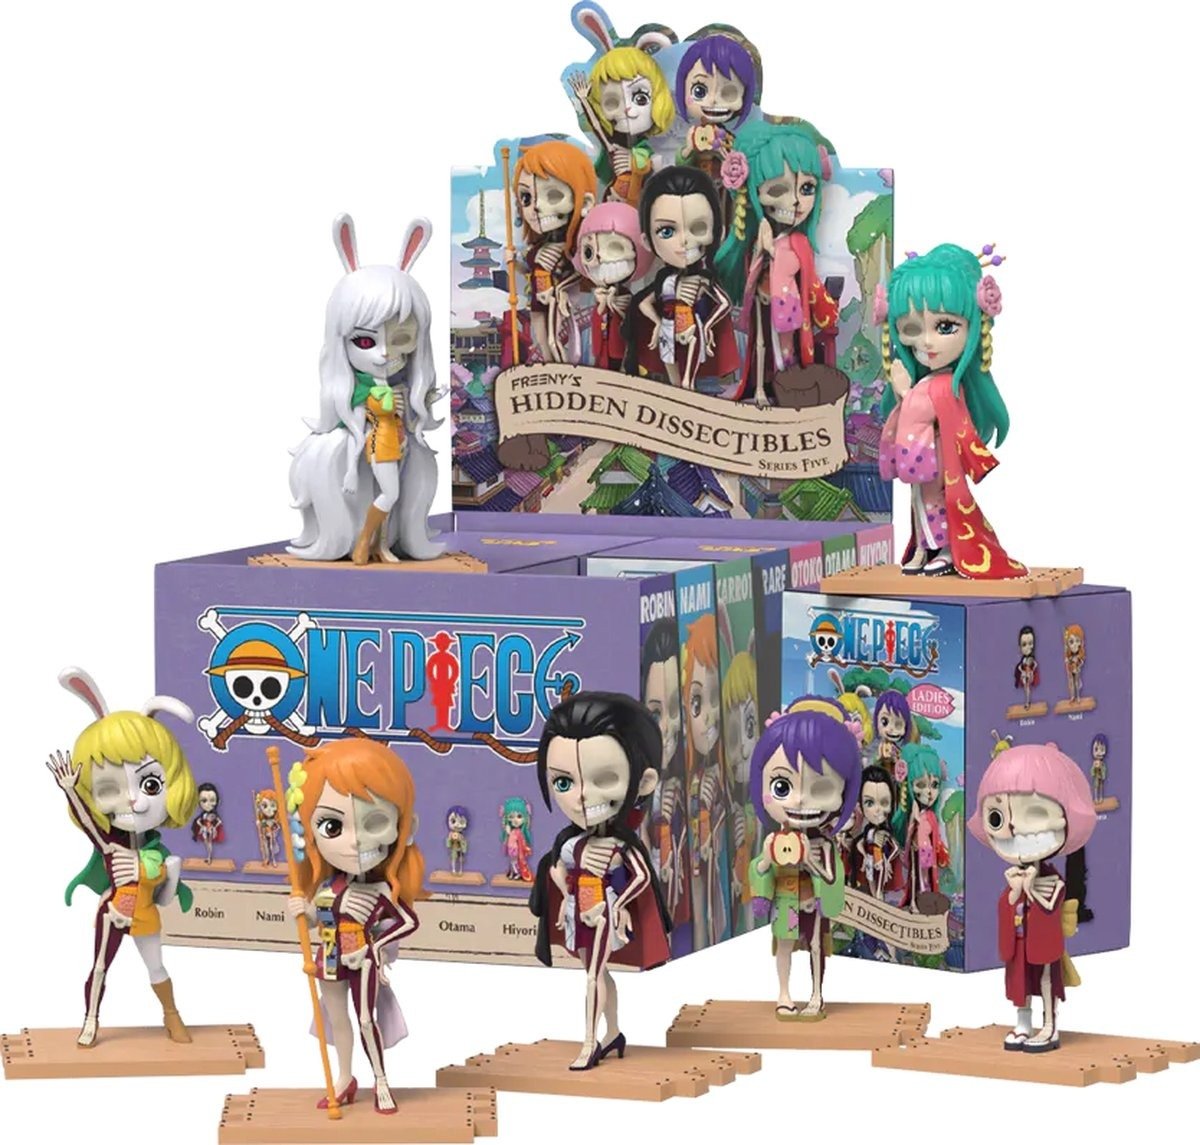 Freeny's Hidden Dissectibles: One Piece (Ladies Edition) Blind Box